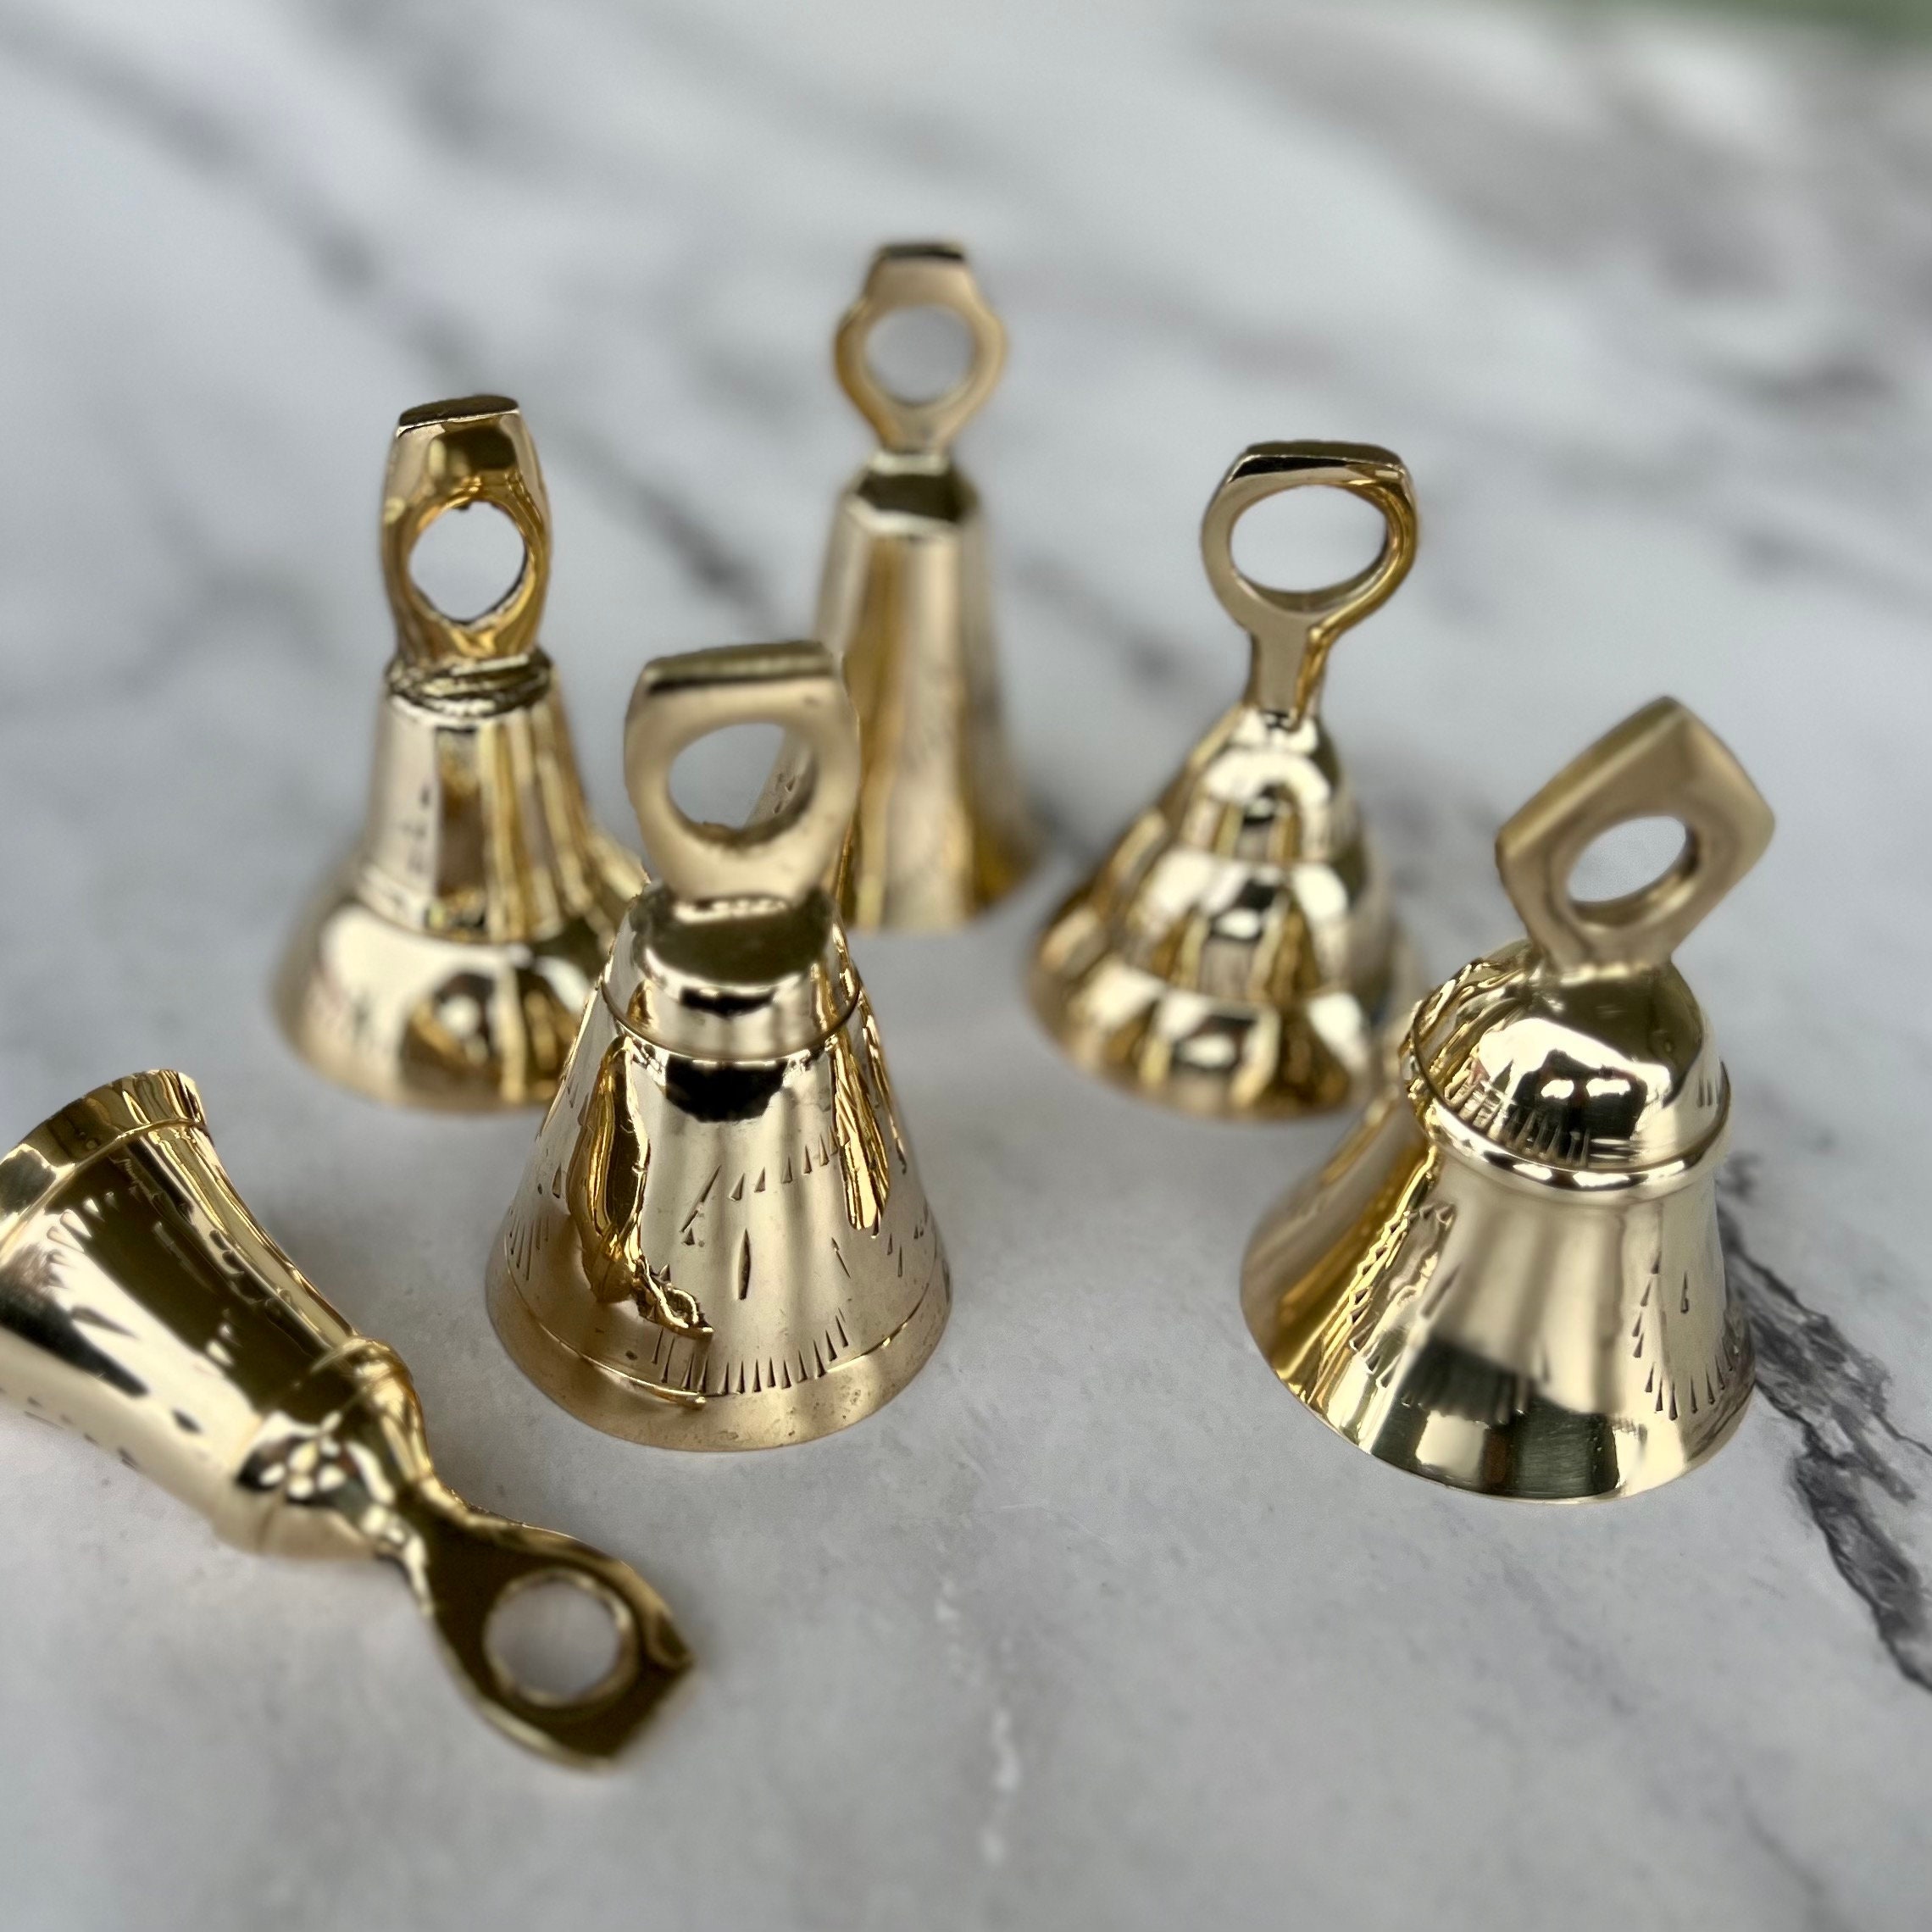 1cm 2cm 10/100pcs Small Bells for Crafts Mini Jingle Bells Gold Silver Pet  Hanging Metal Bell Wedding Christmas Decoration Accessories 